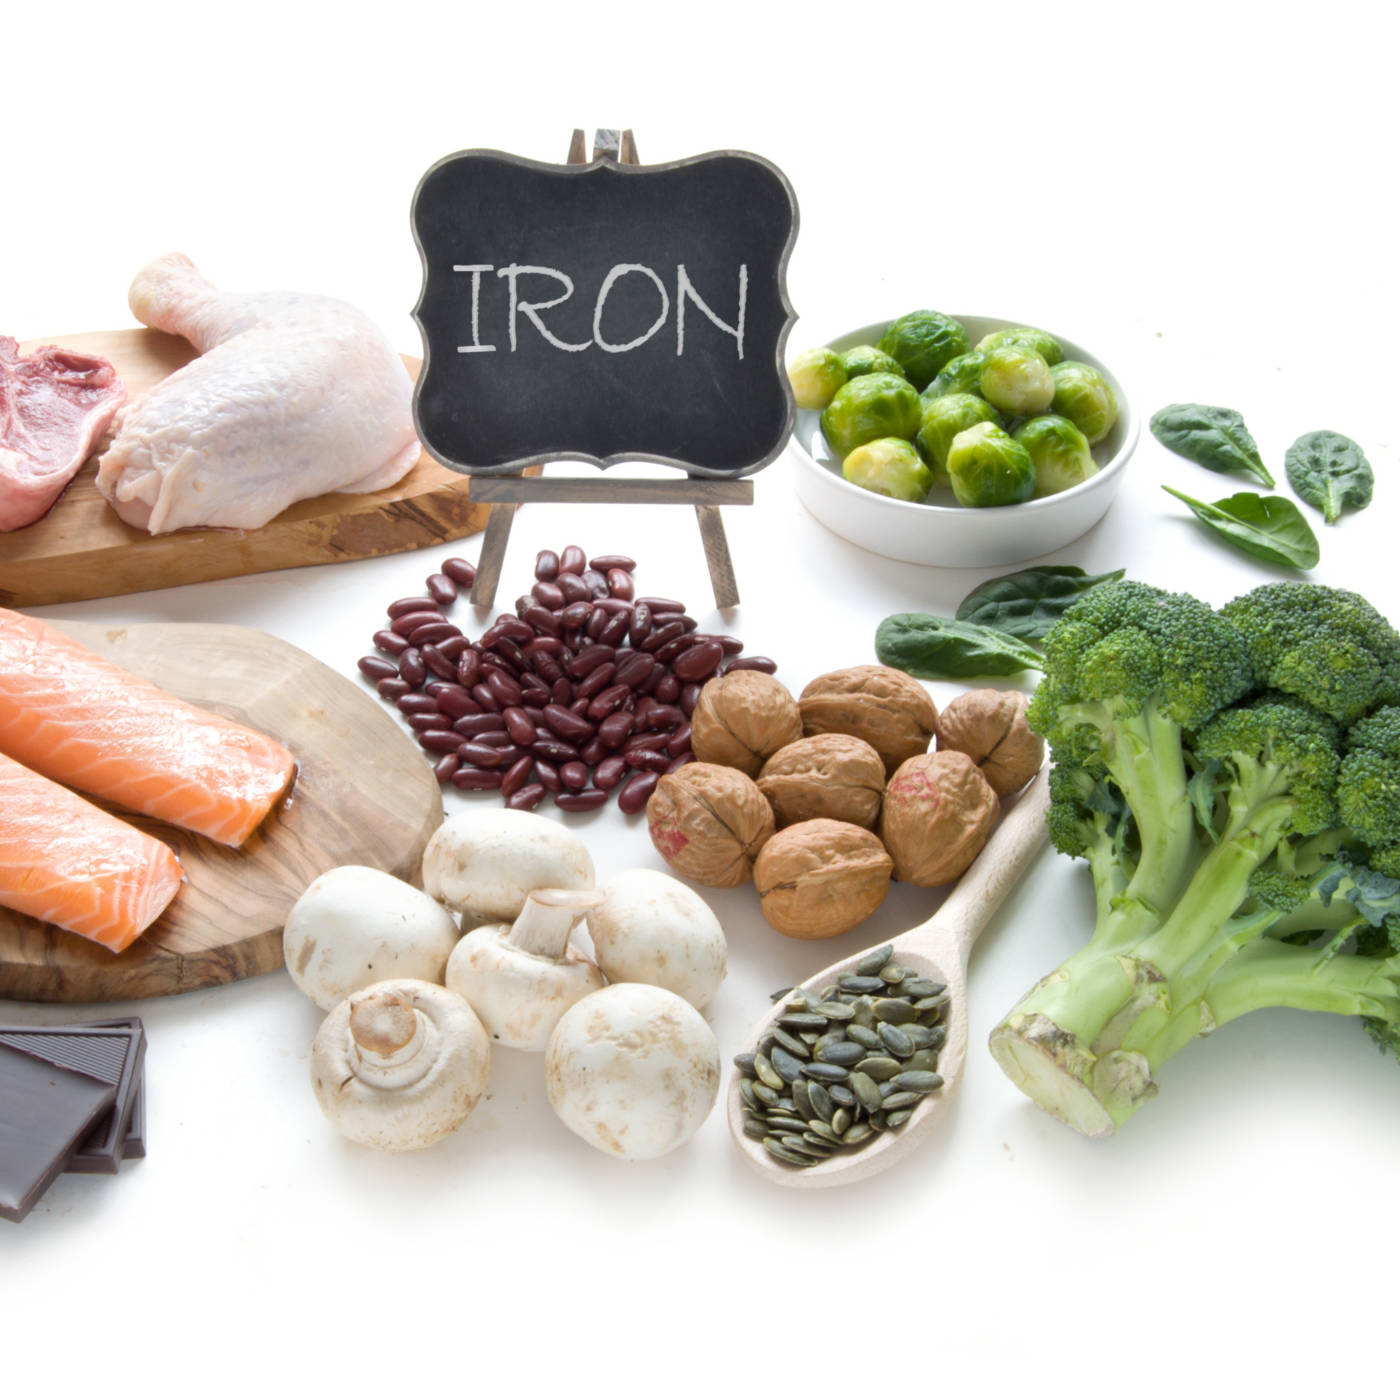 6 signs you are Iron deficient